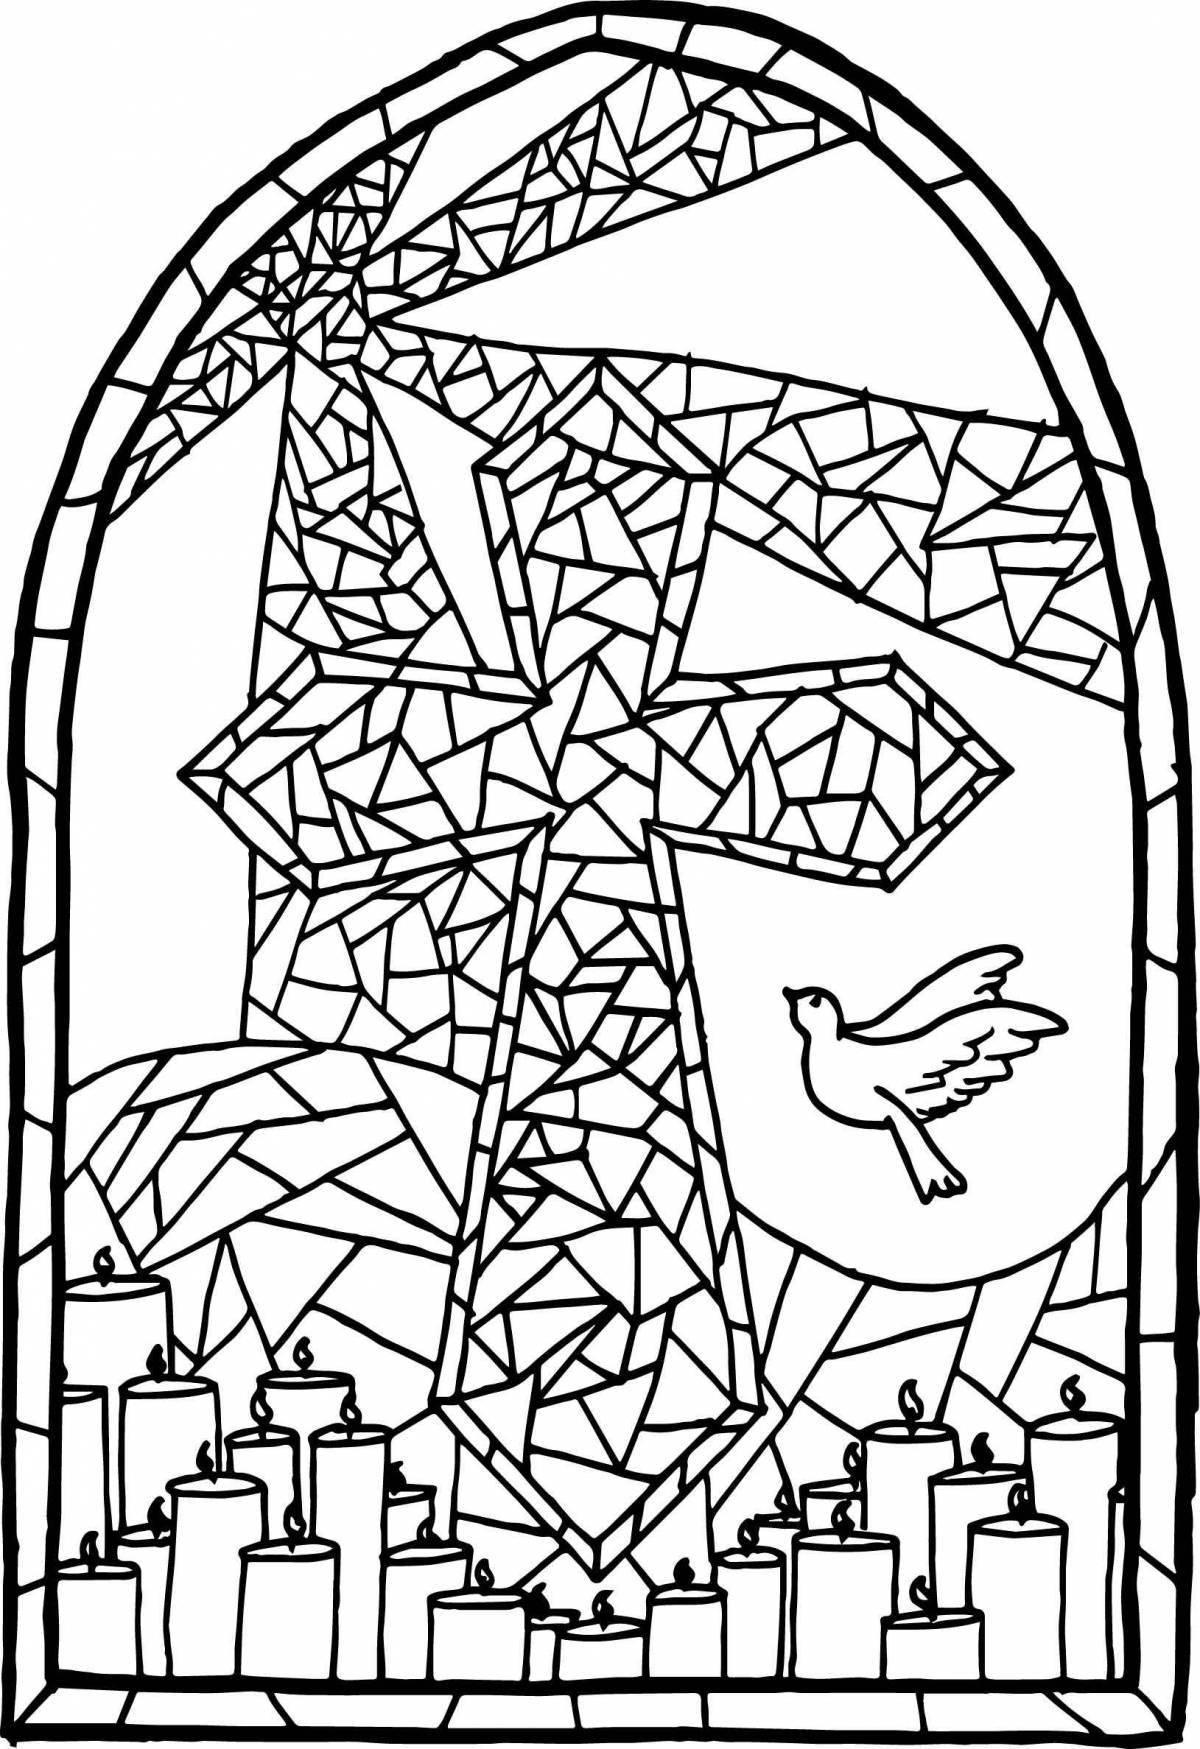 Wonderful stained glass coloring pages for preschoolers